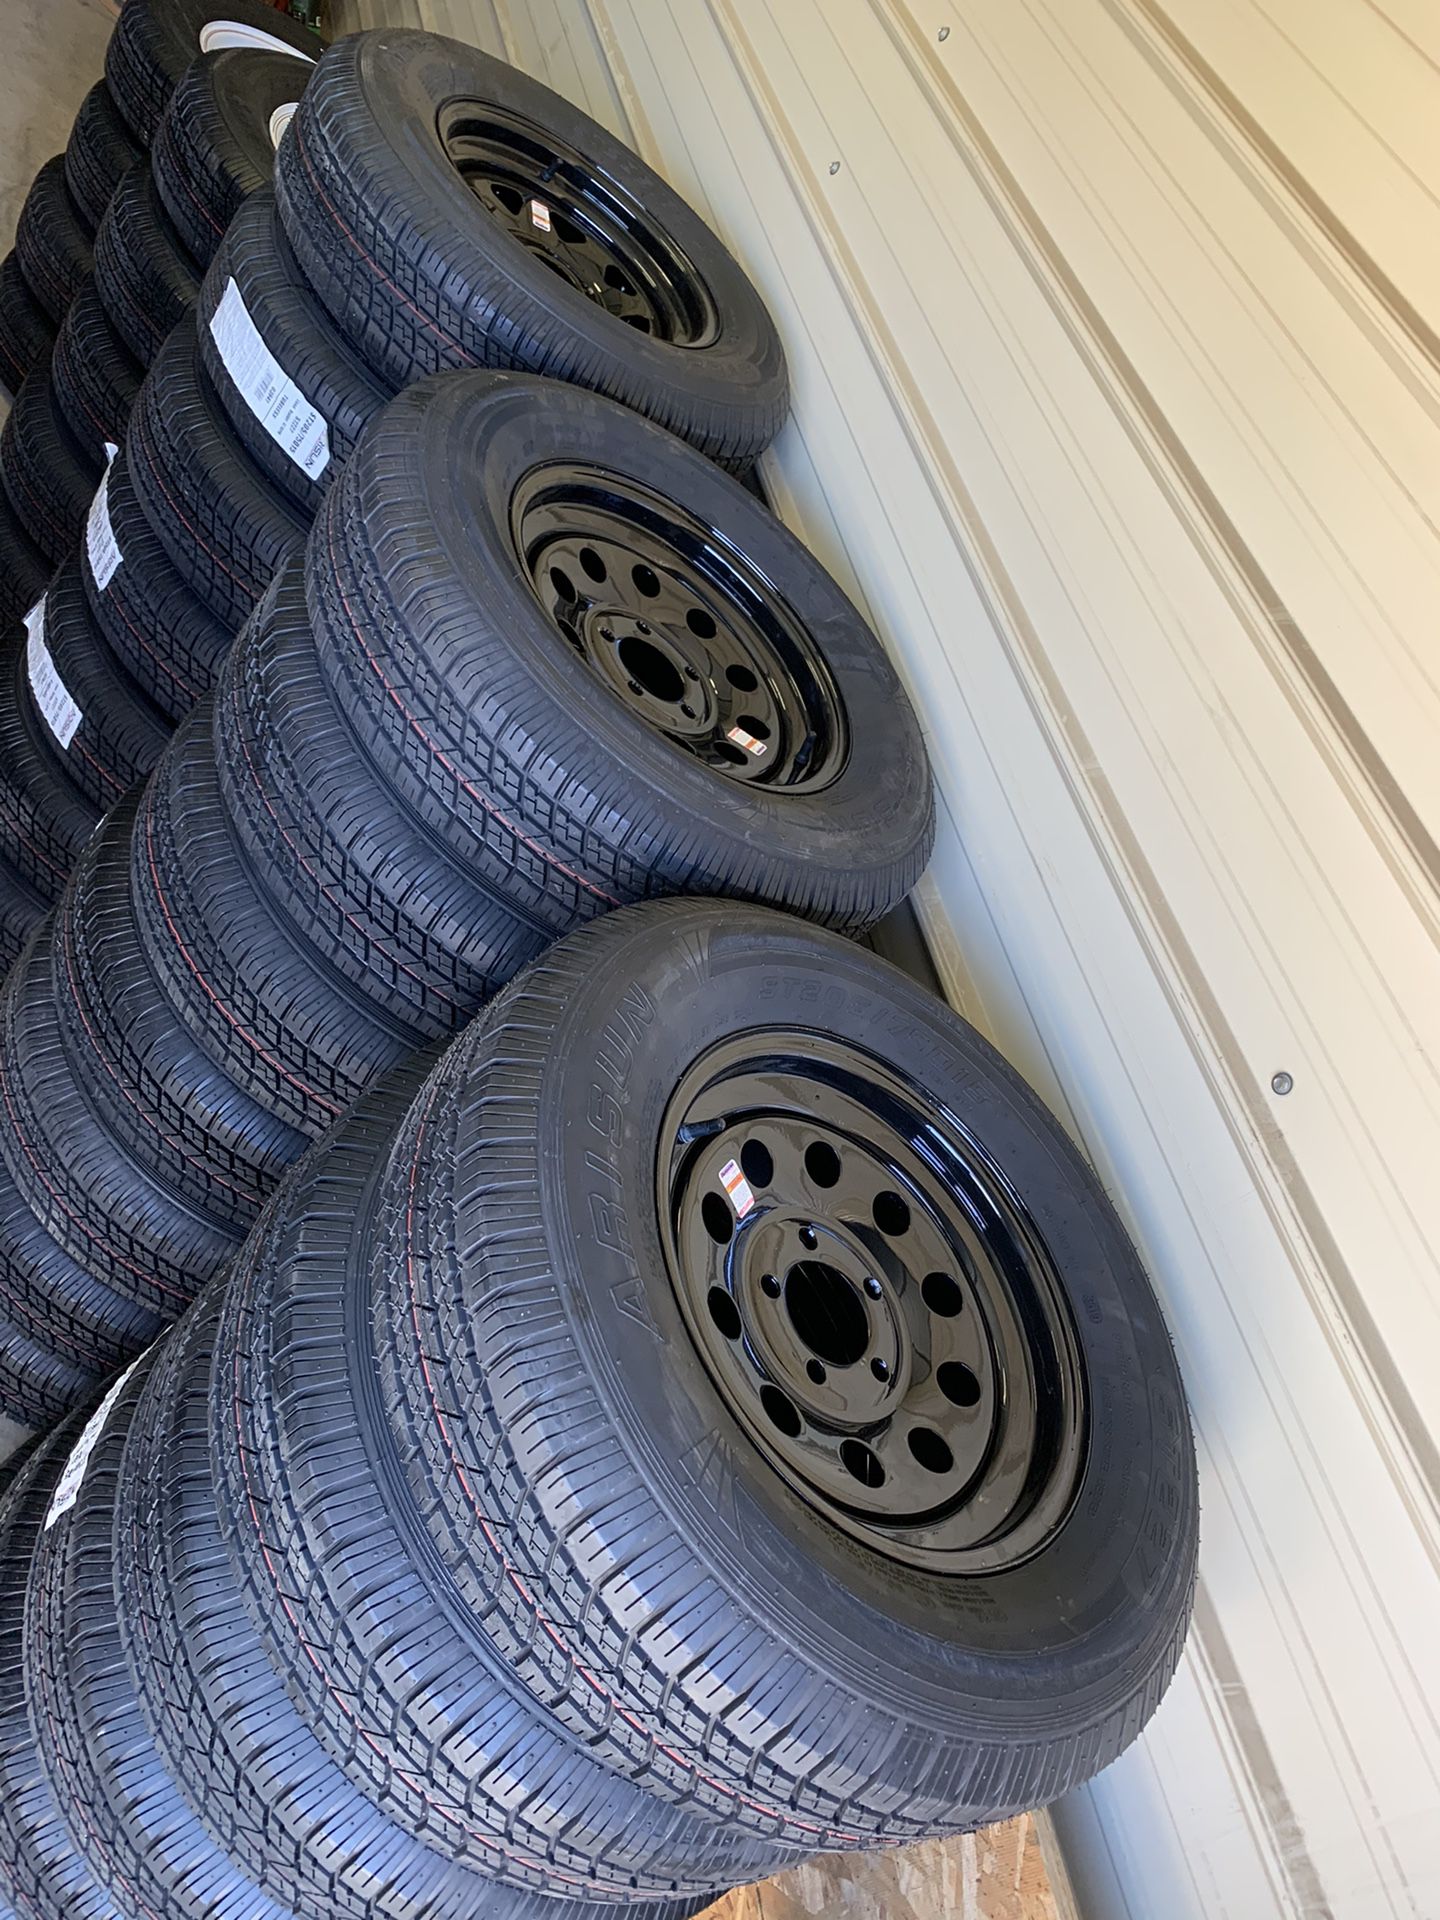 (Brand new) 205/75/15 trailer tires with 5 lug trailer wheels